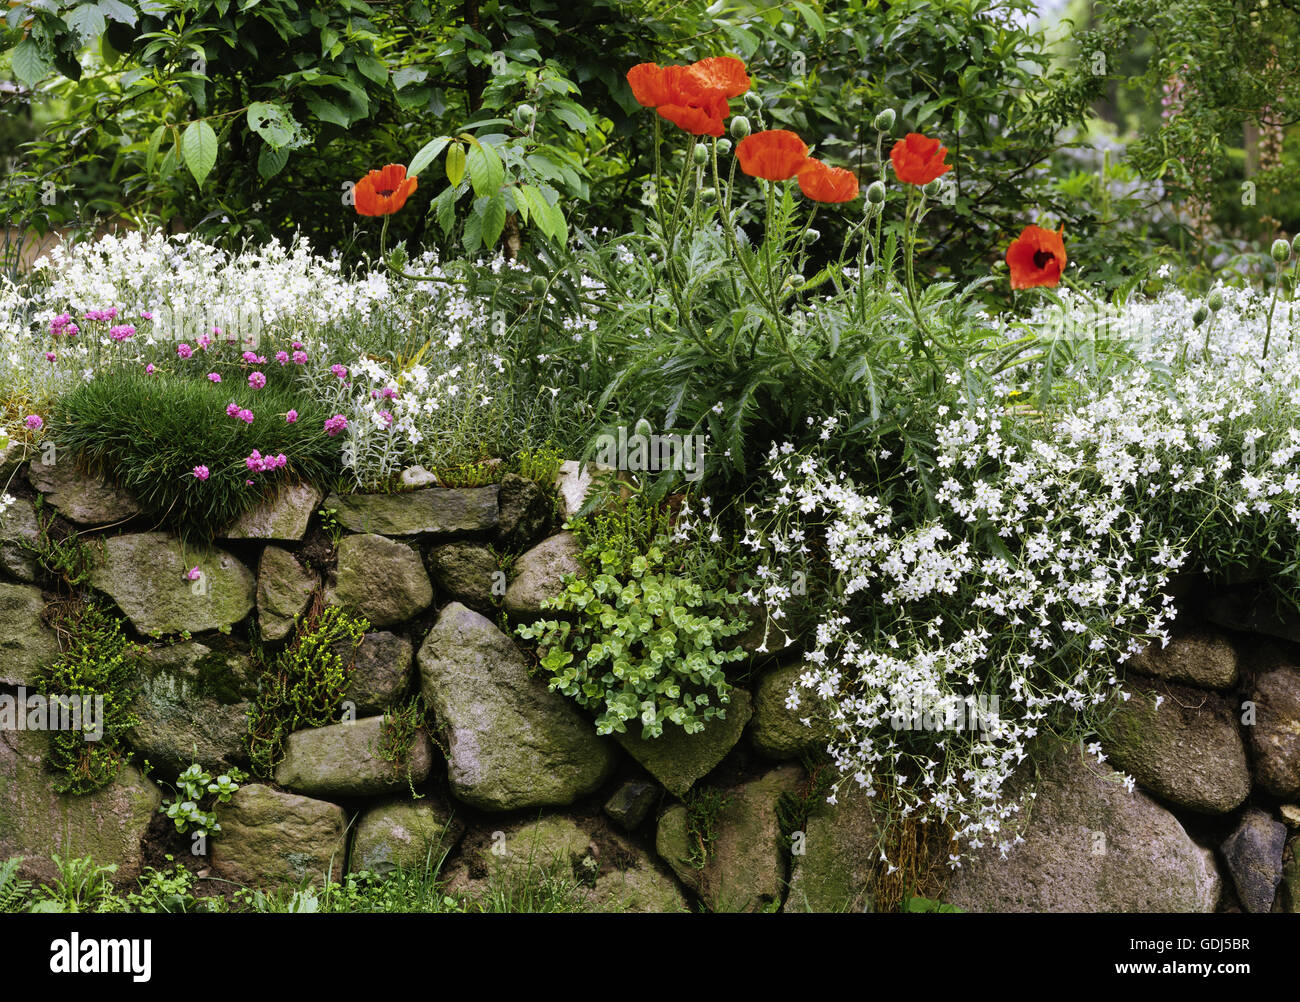 botany, Mouse-ear chickeed, (Cerastium), poppy and Mouse-ear chickeed in rock garden, Stock Photo